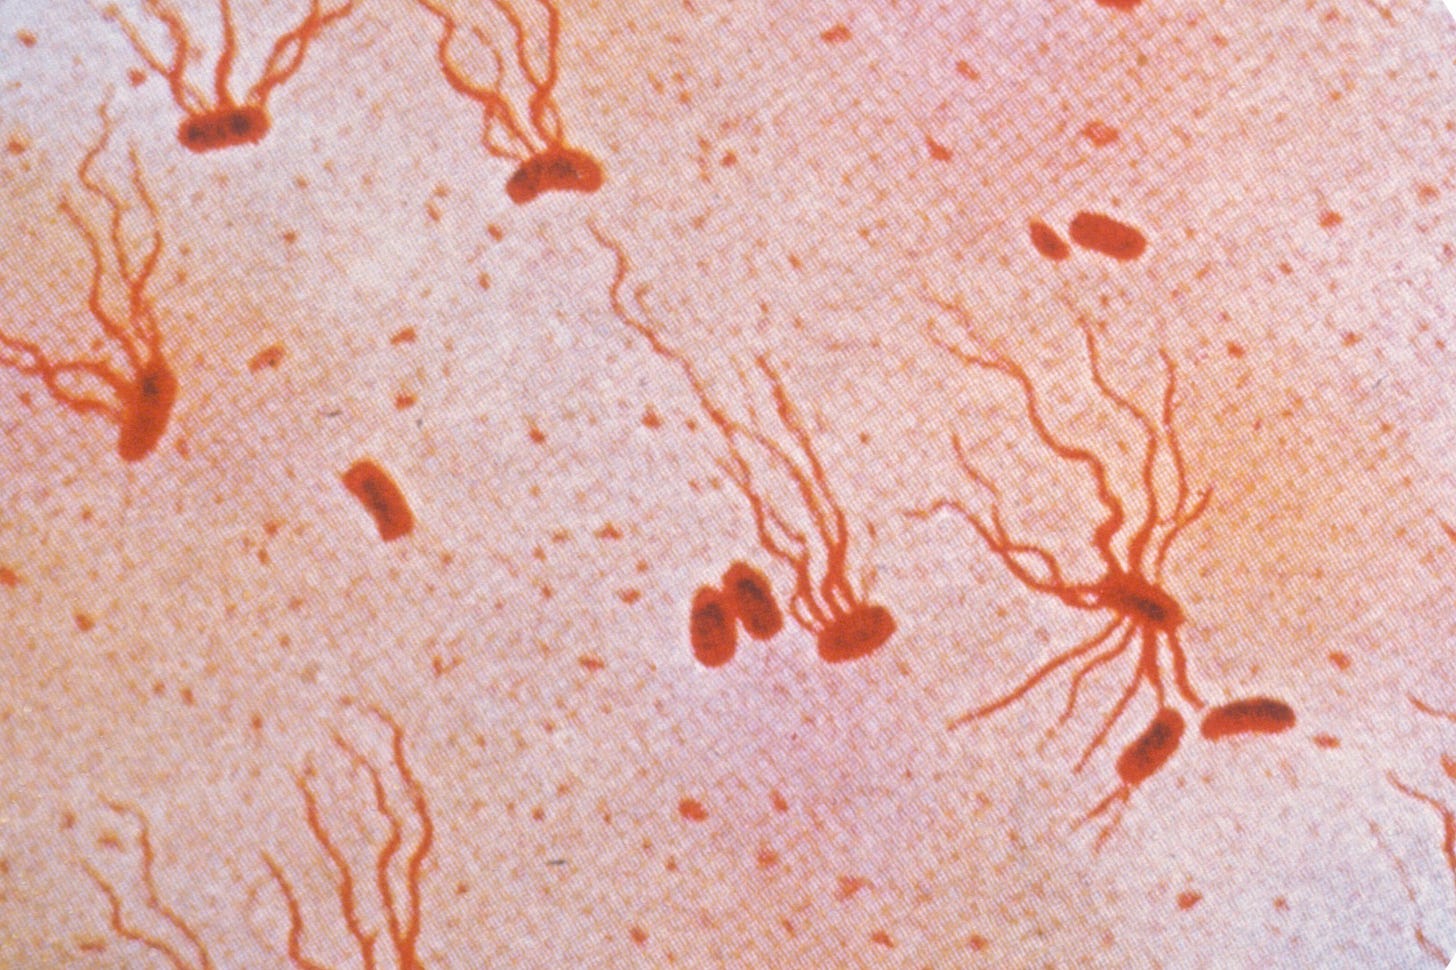 A photomicrograph of S. Typhi bacteria.